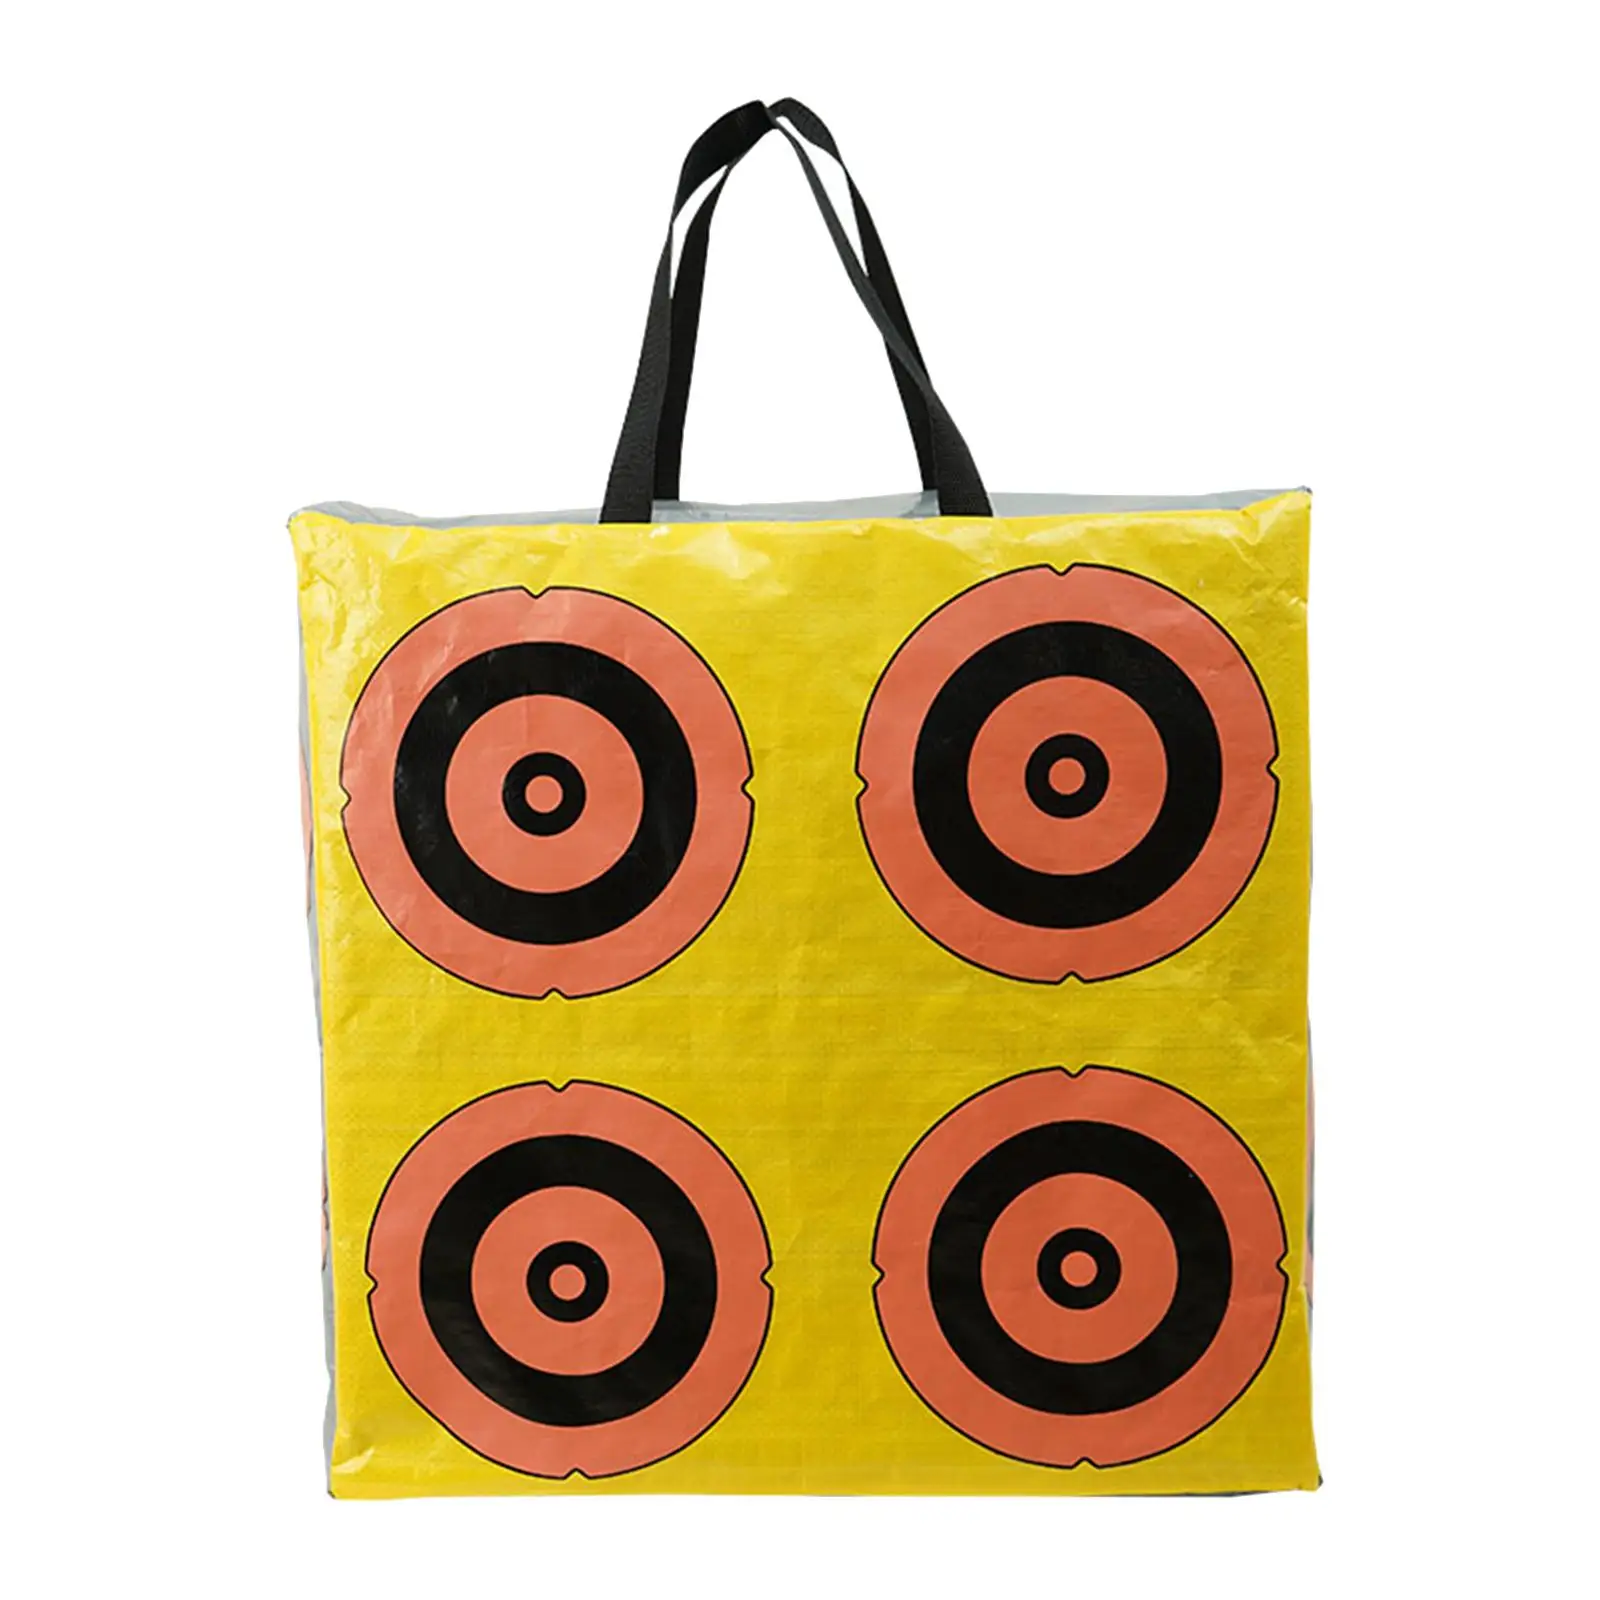 Field Point Bag Archery Target Lightweight Sports Practice Shooting Targets